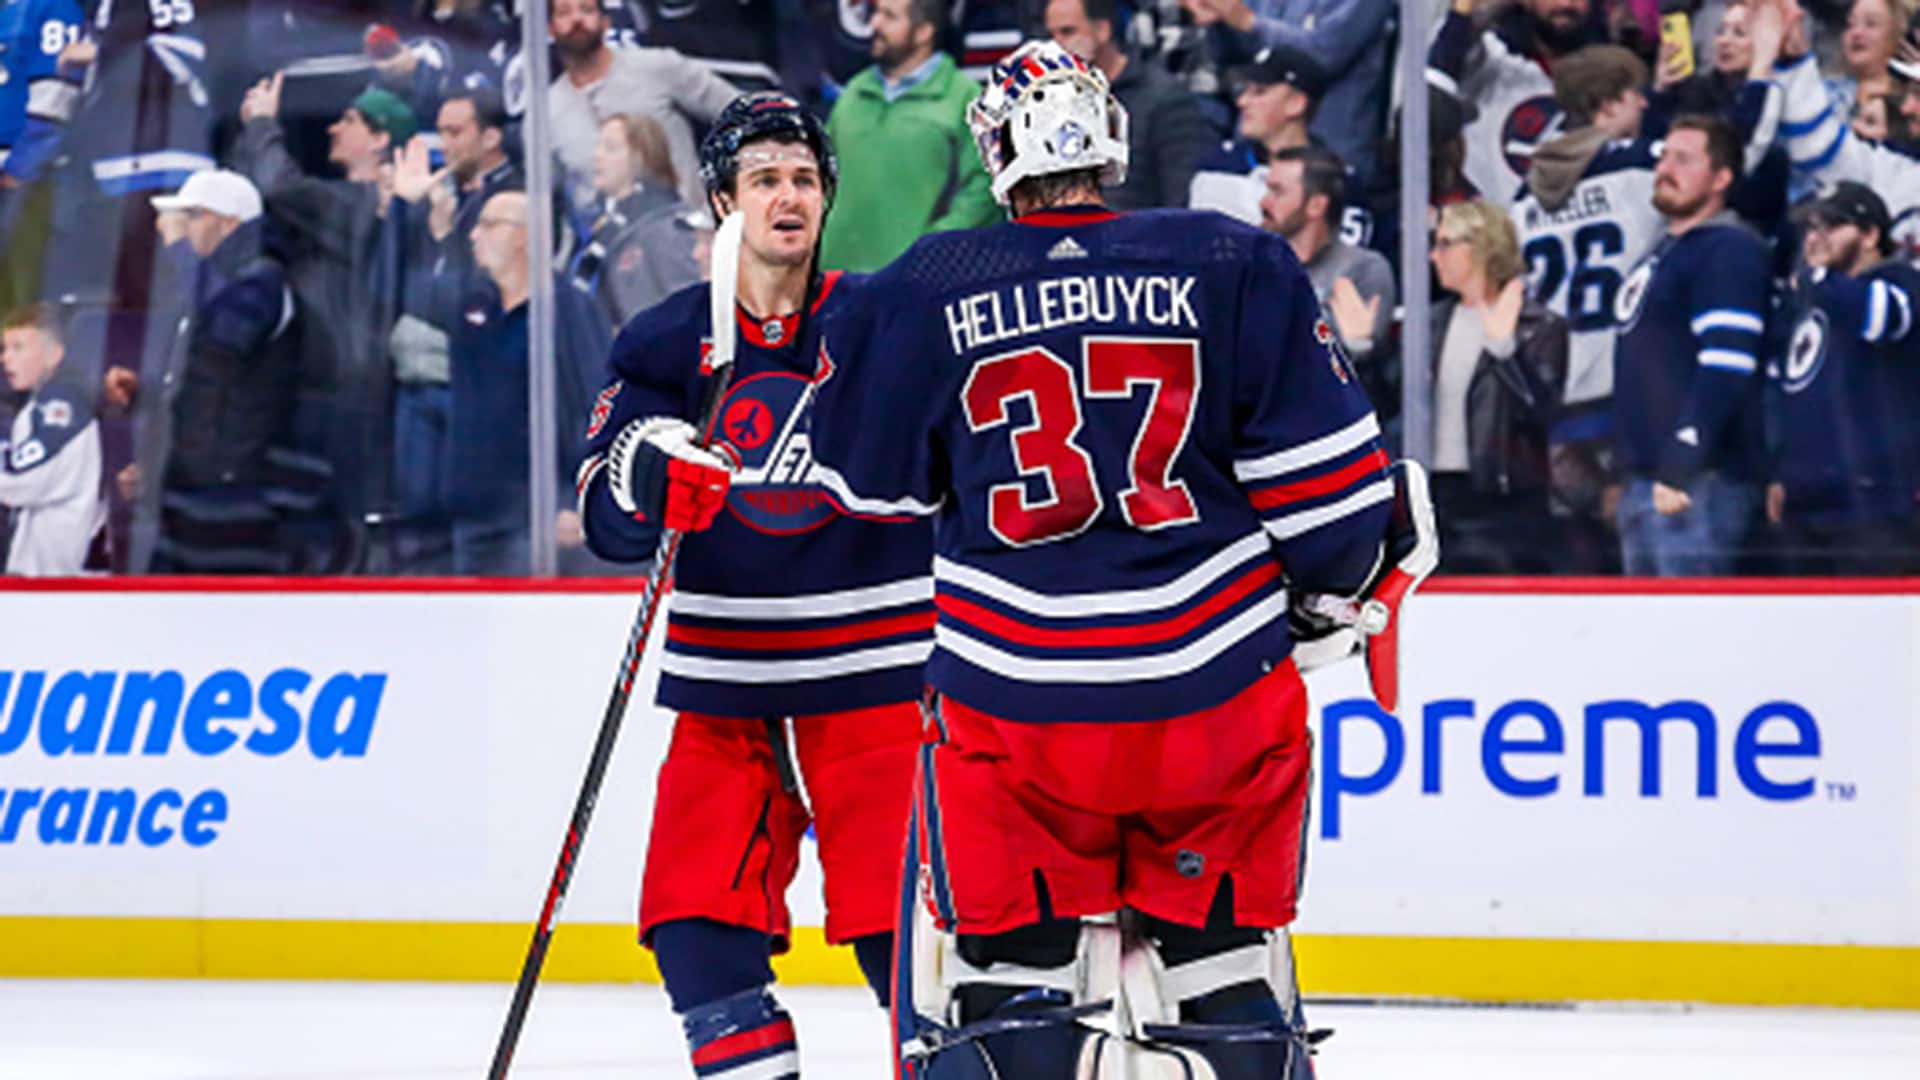 Report: Devils had conversation with Jets about Hellebuyck